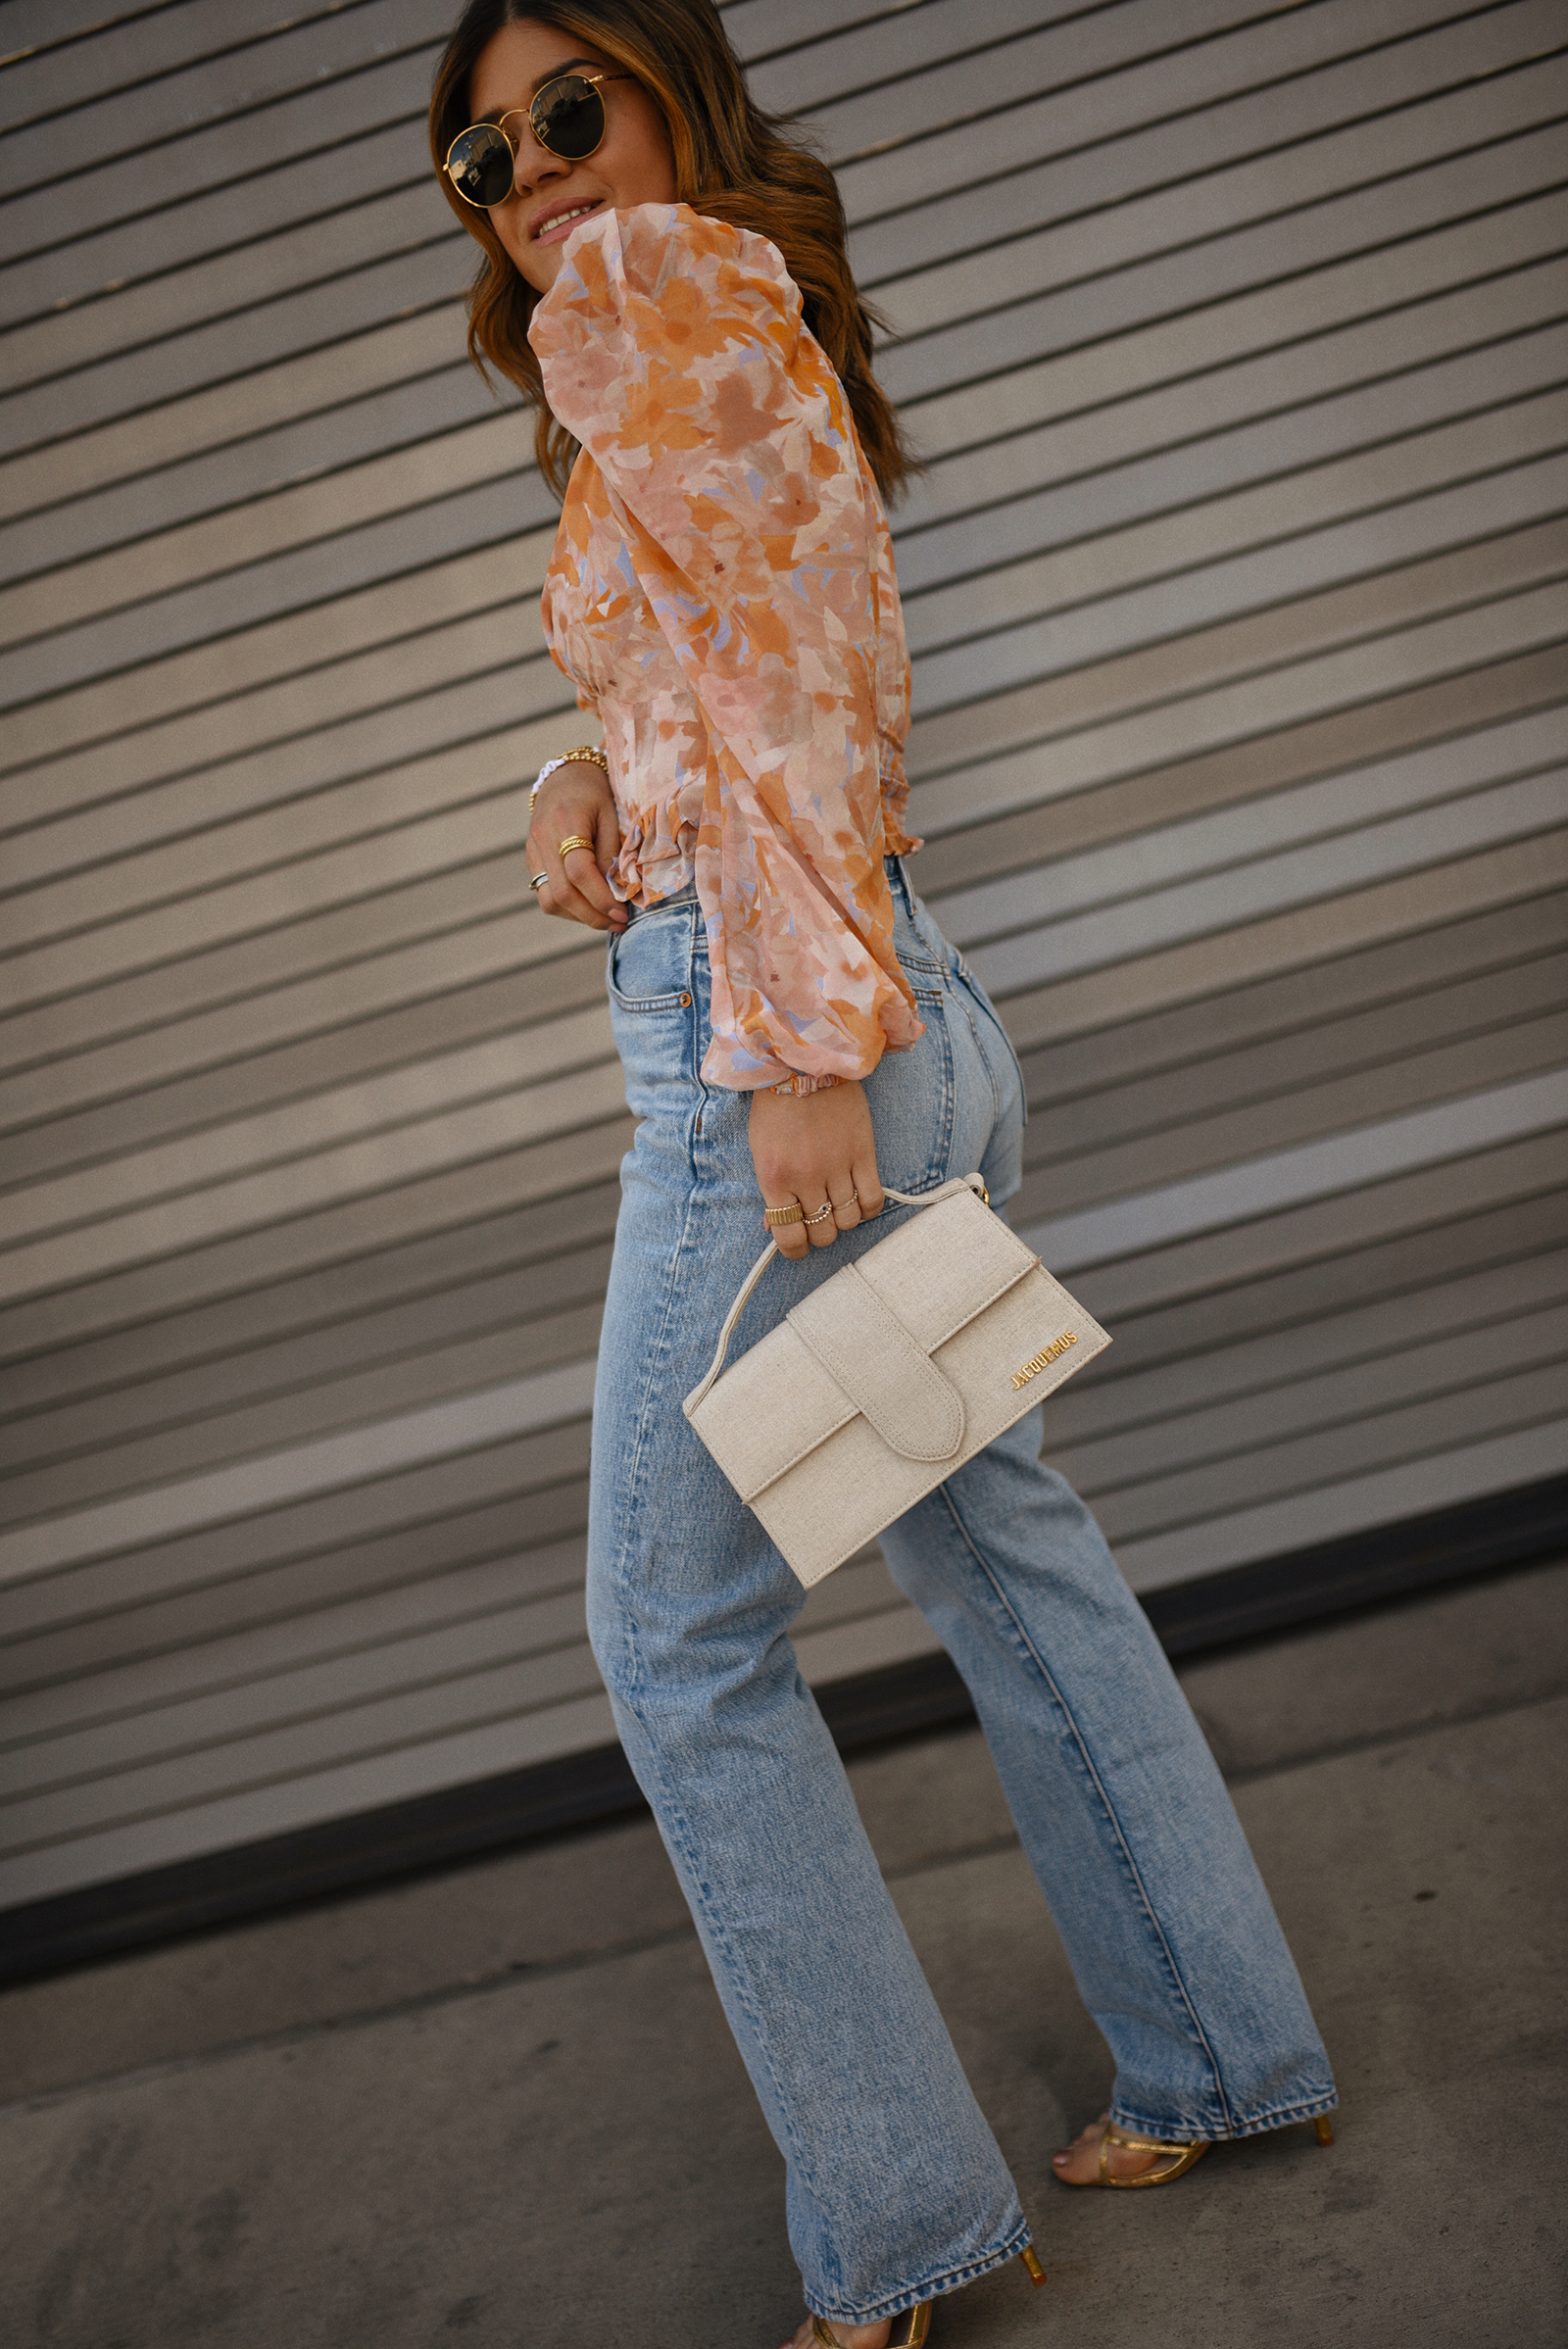 Carolina Hellal of Chic Talk wearing a ASTR The Label top, a Madewell straight jean, a Steve Madden heels sandals and Le bambino bag via Jacquemus